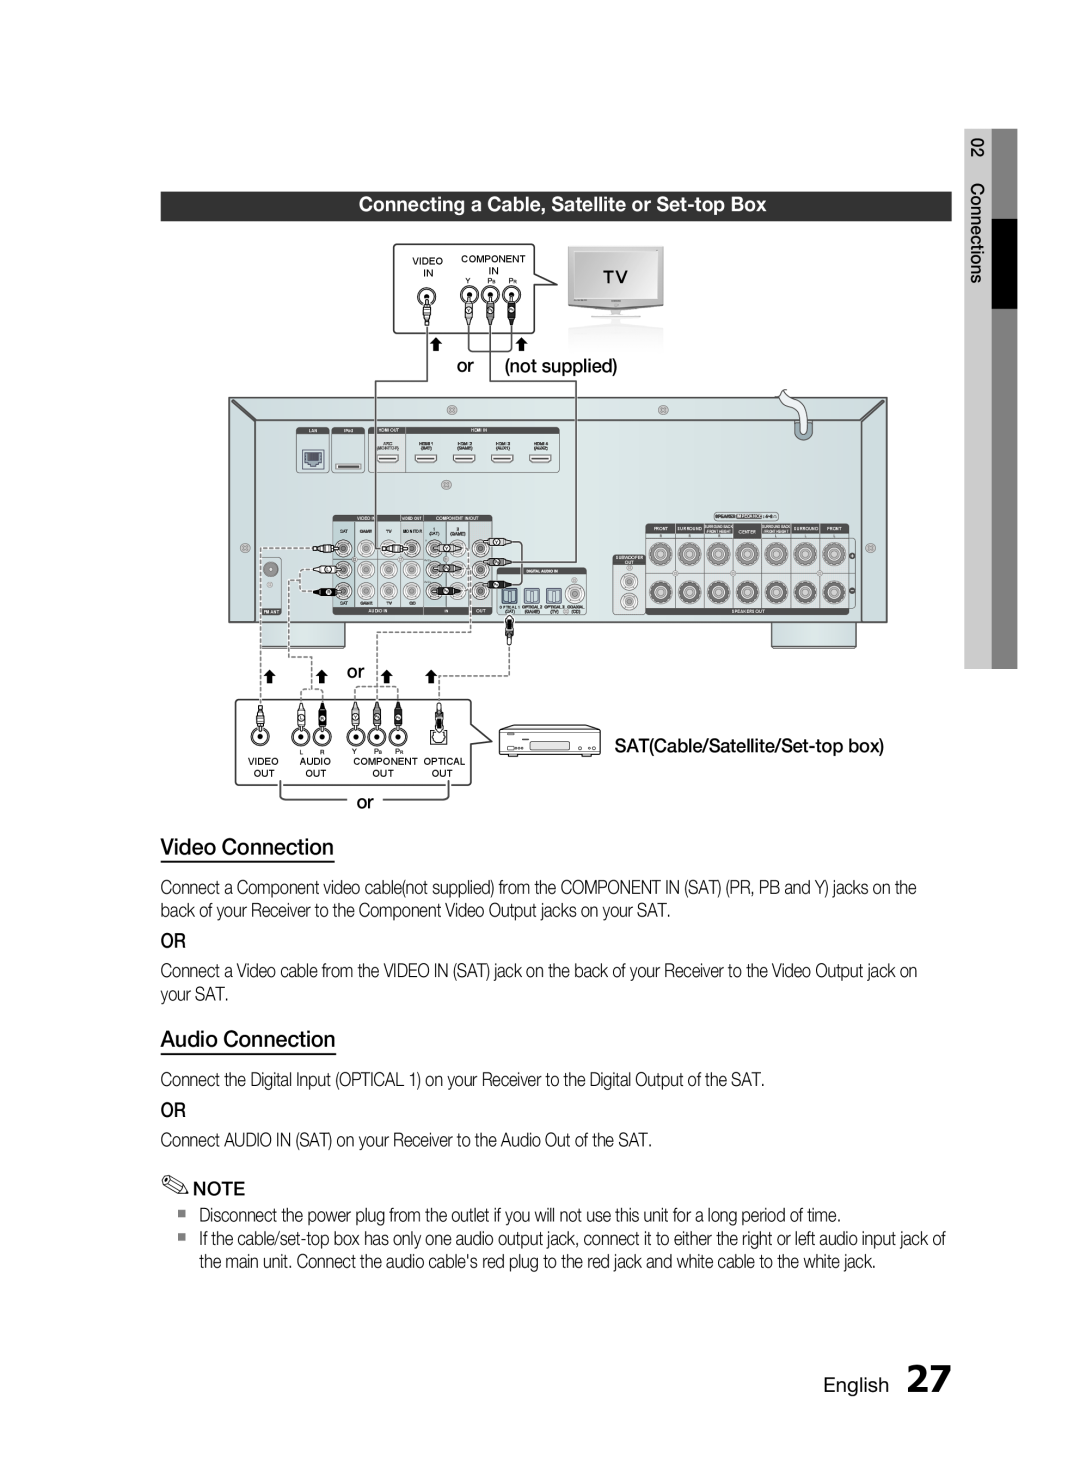 Samsung HW-D7000 user manual Connecting a Cable, Satellite or Set-topBox, Video Connection, Audio Connection 